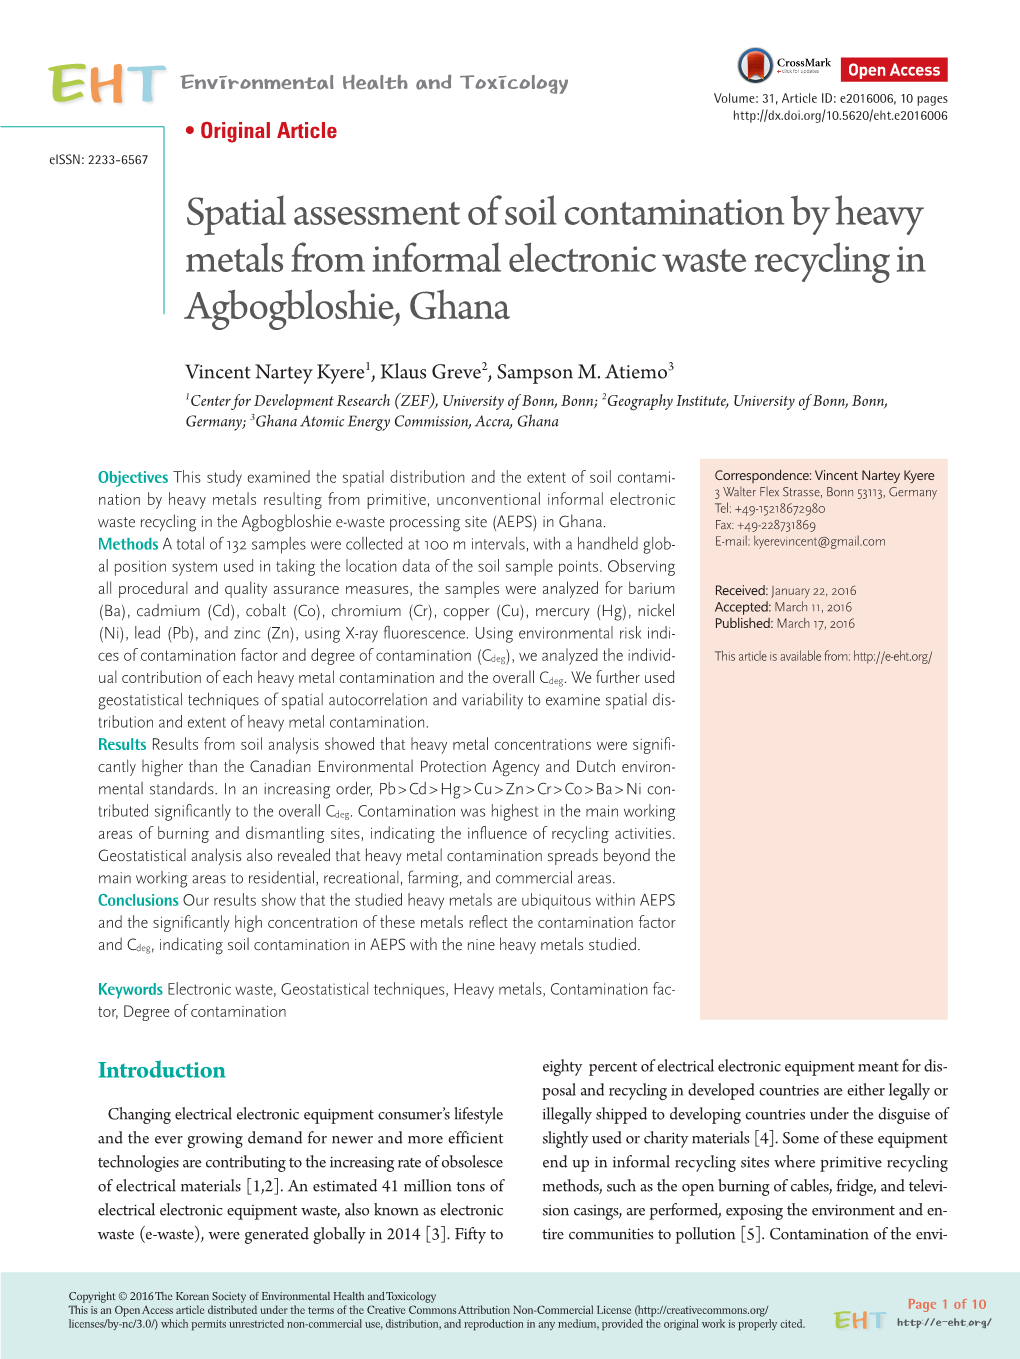 Spatial Assessment of Soil Contamination by Heavy Metals from Informal Electronic Waste Recycling in Agbogbloshie, Ghana